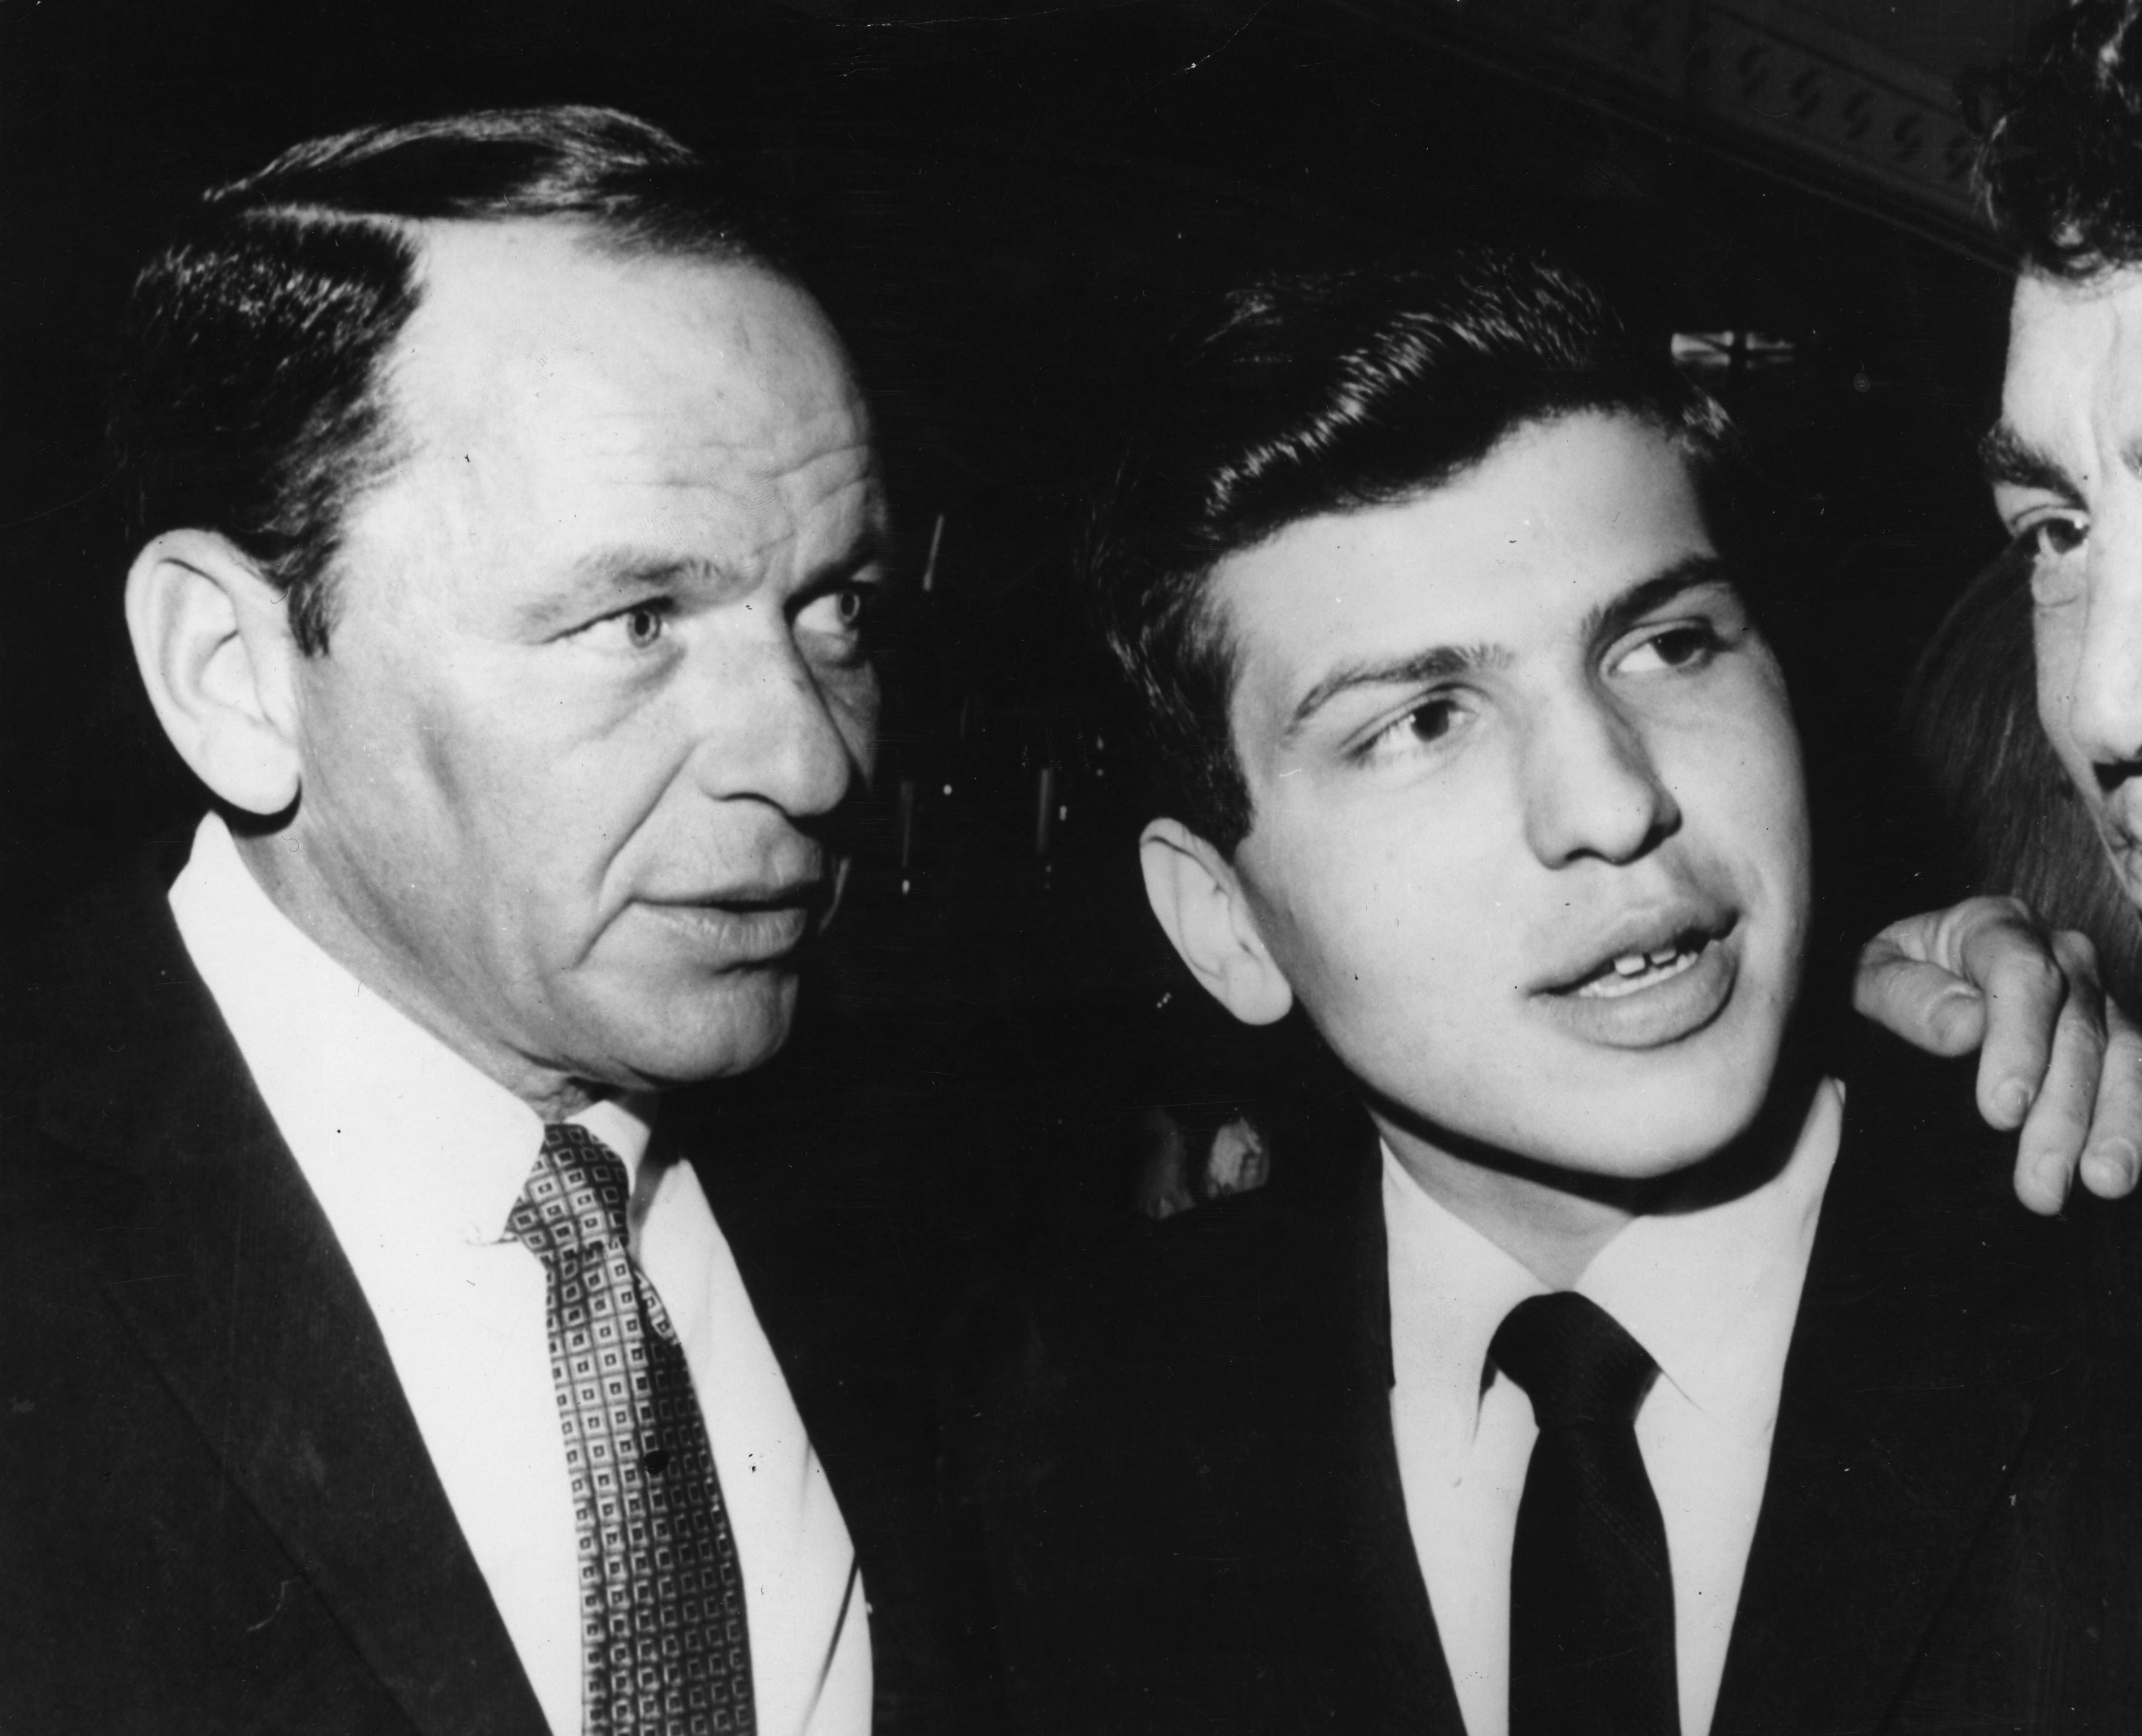 Frank Sinatra’s Son Was Once Kidnapped in a Terrifying Crime